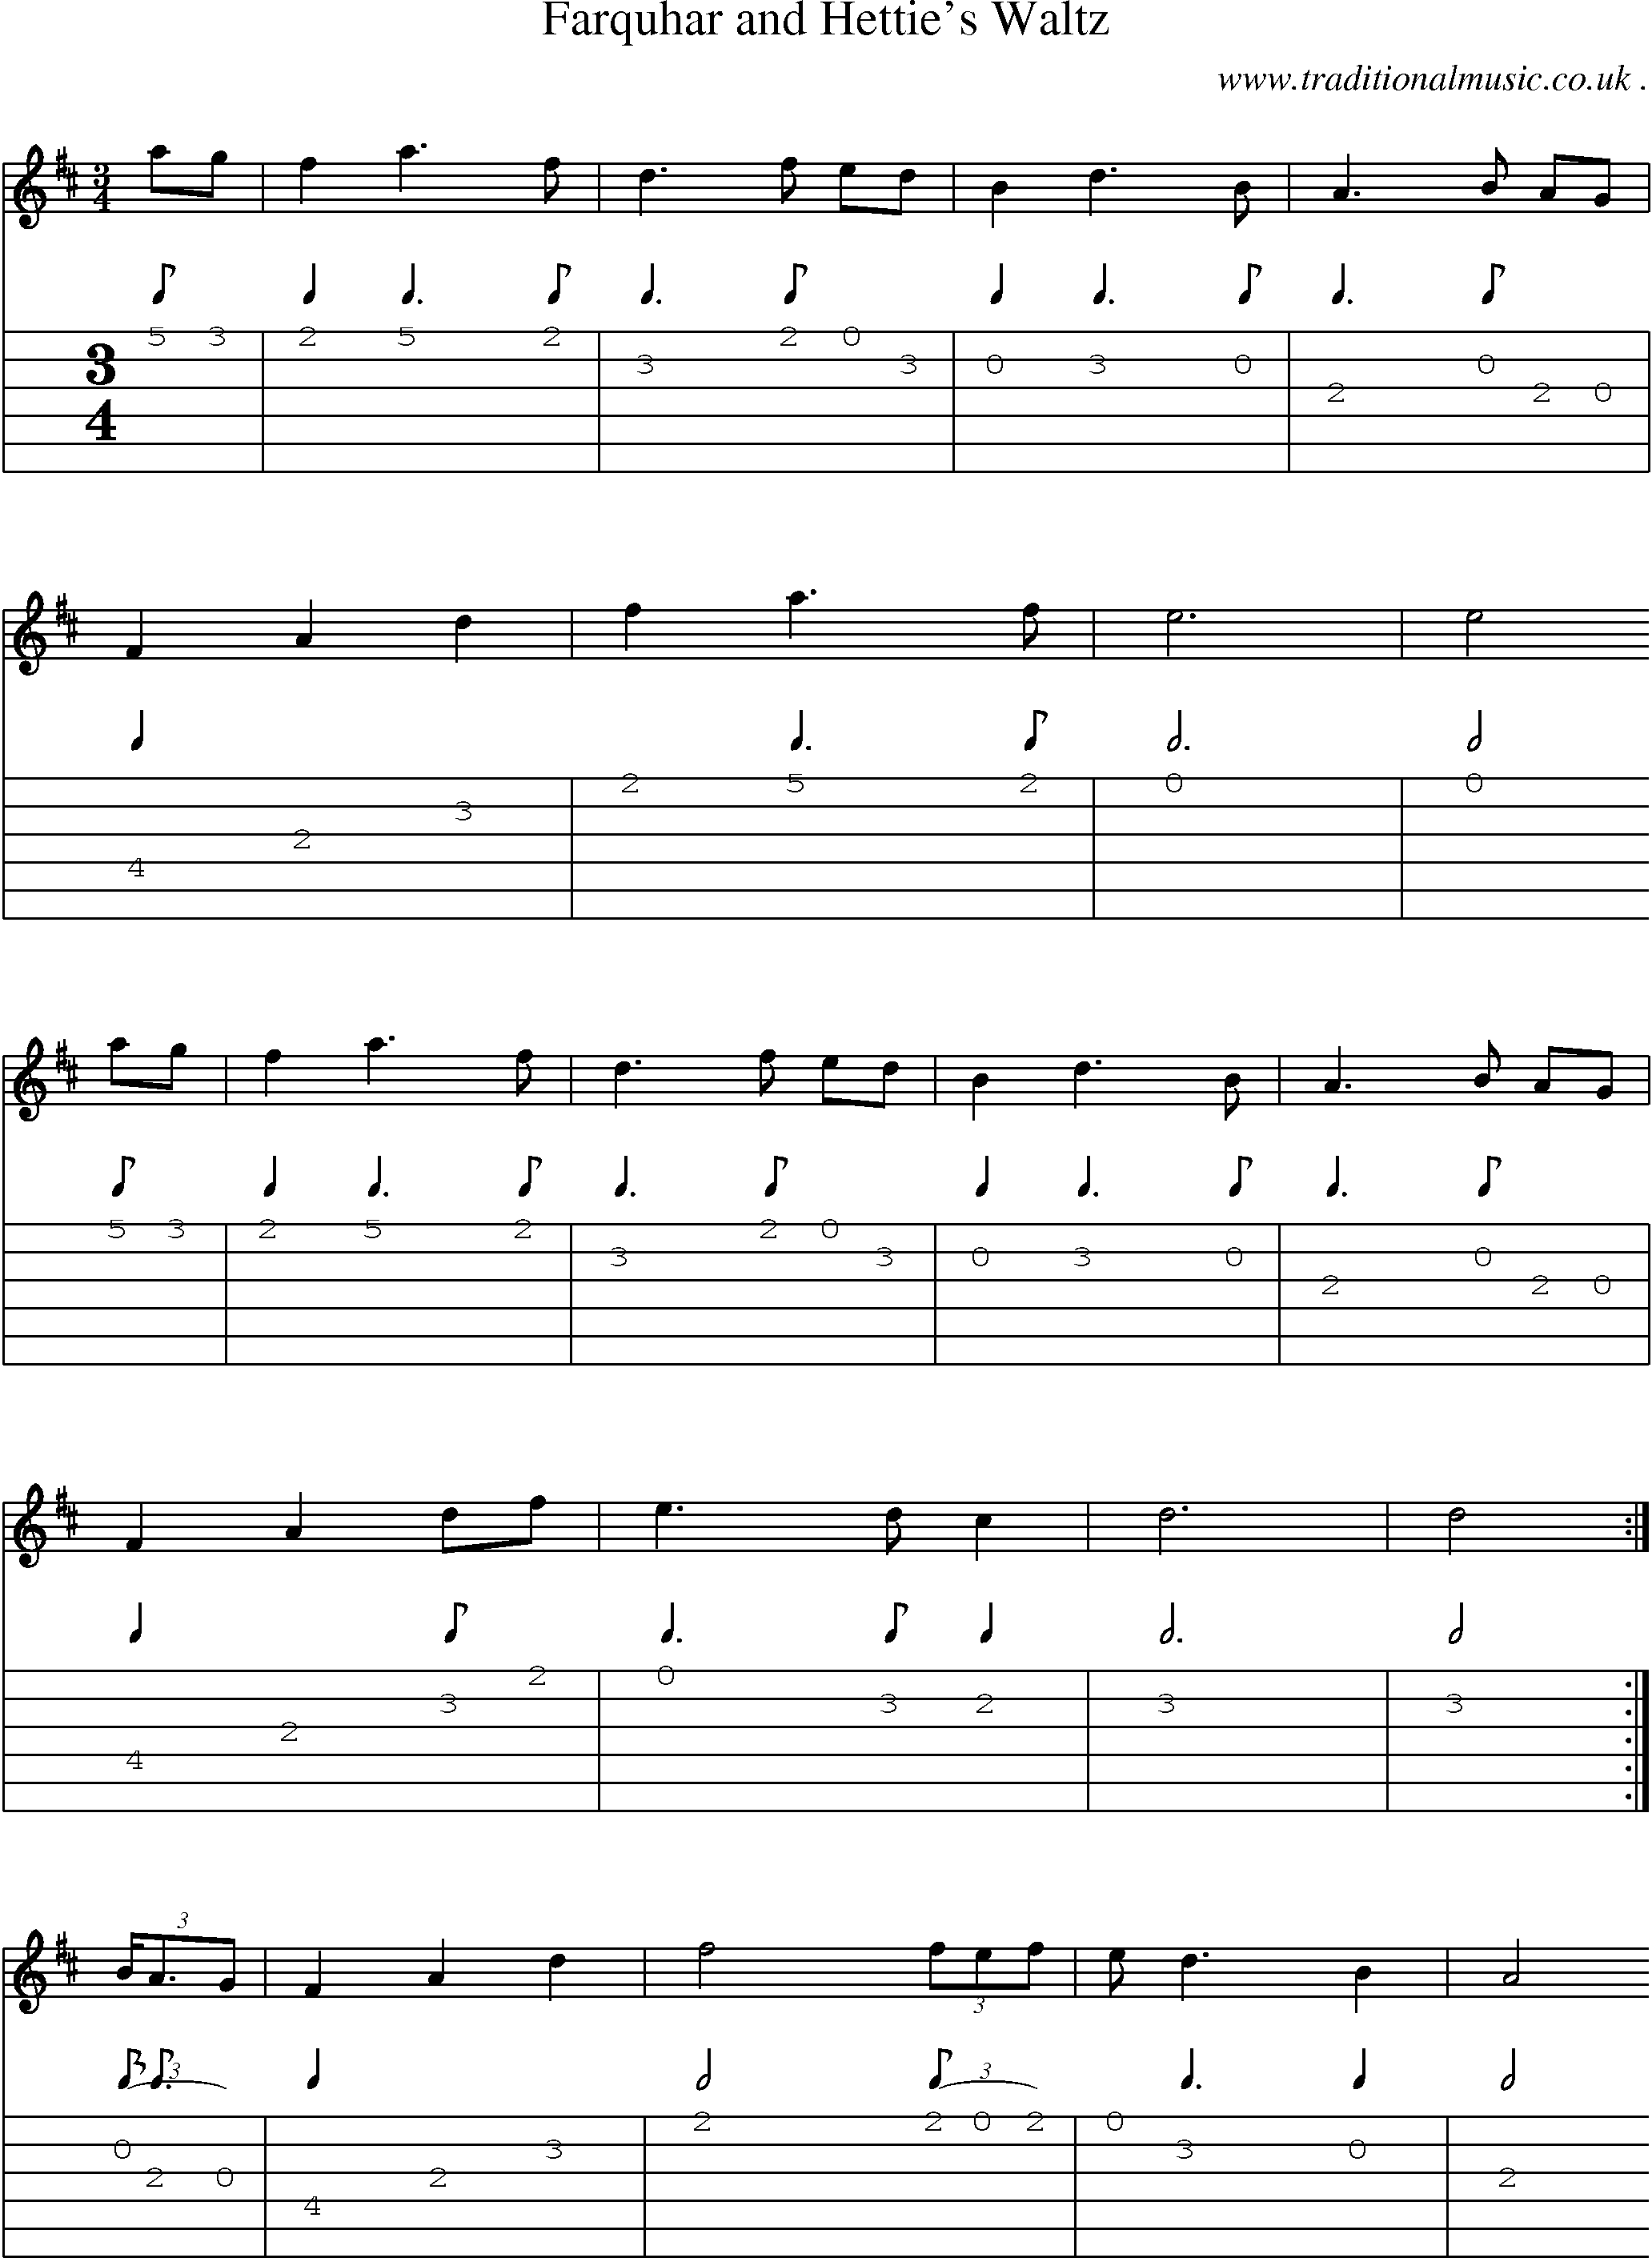 Sheet-music  score, Chords and Guitar Tabs for Farquhar And Hetties Waltz